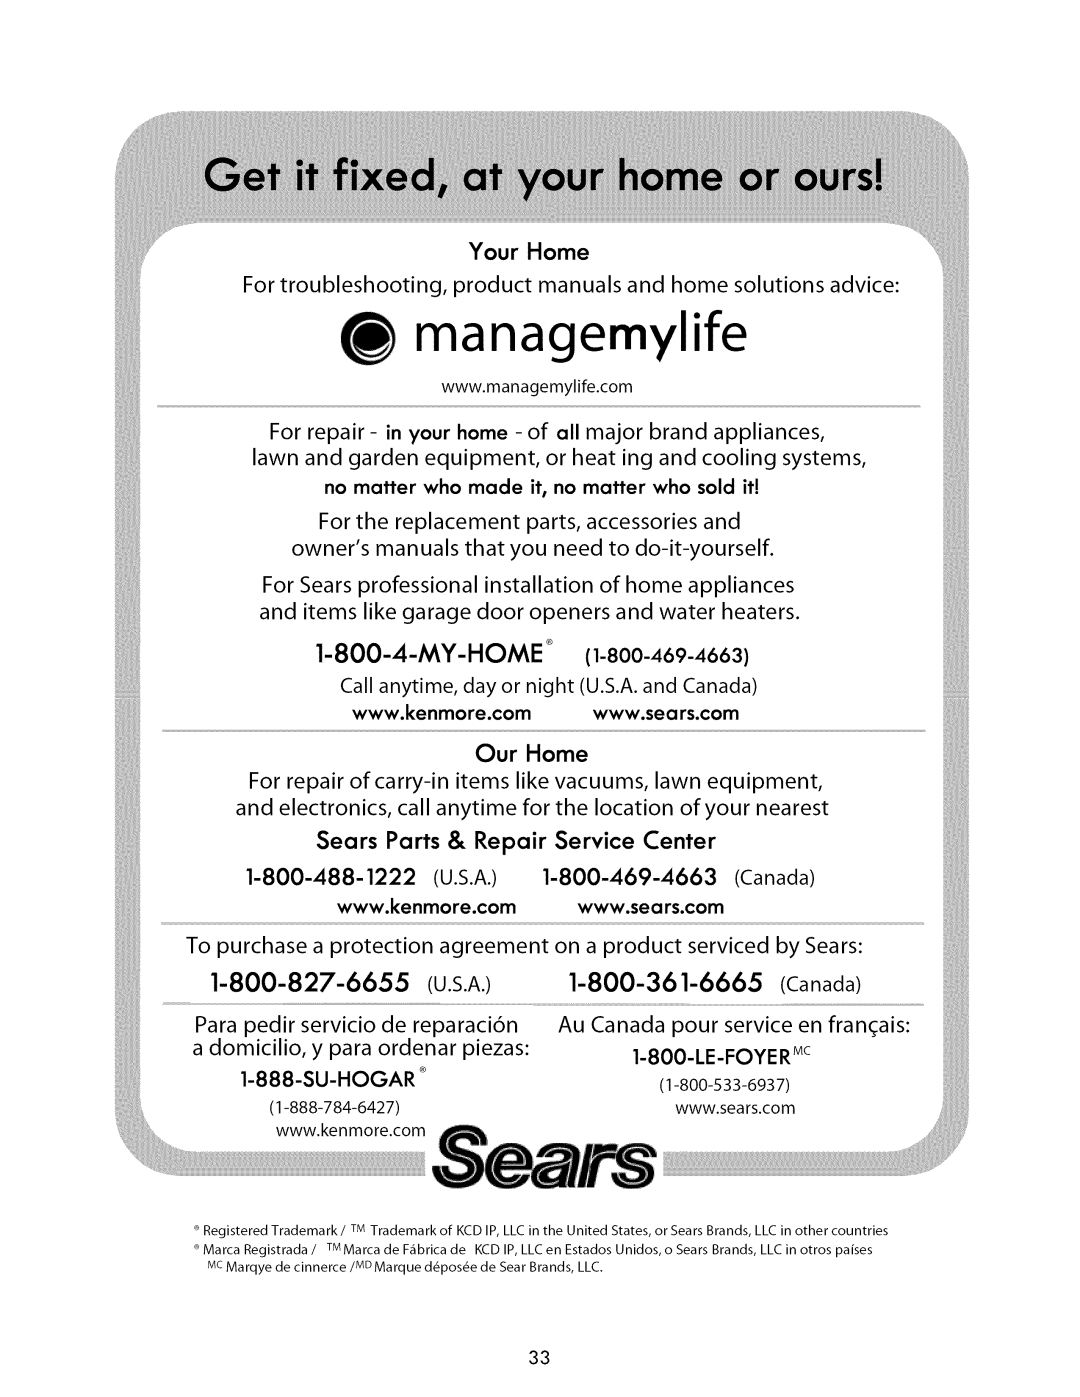 Kenmore 721.86009, 721.86002, 721.86003 manual Our Home, Sears Parts & Repair Service Center, managemylife 